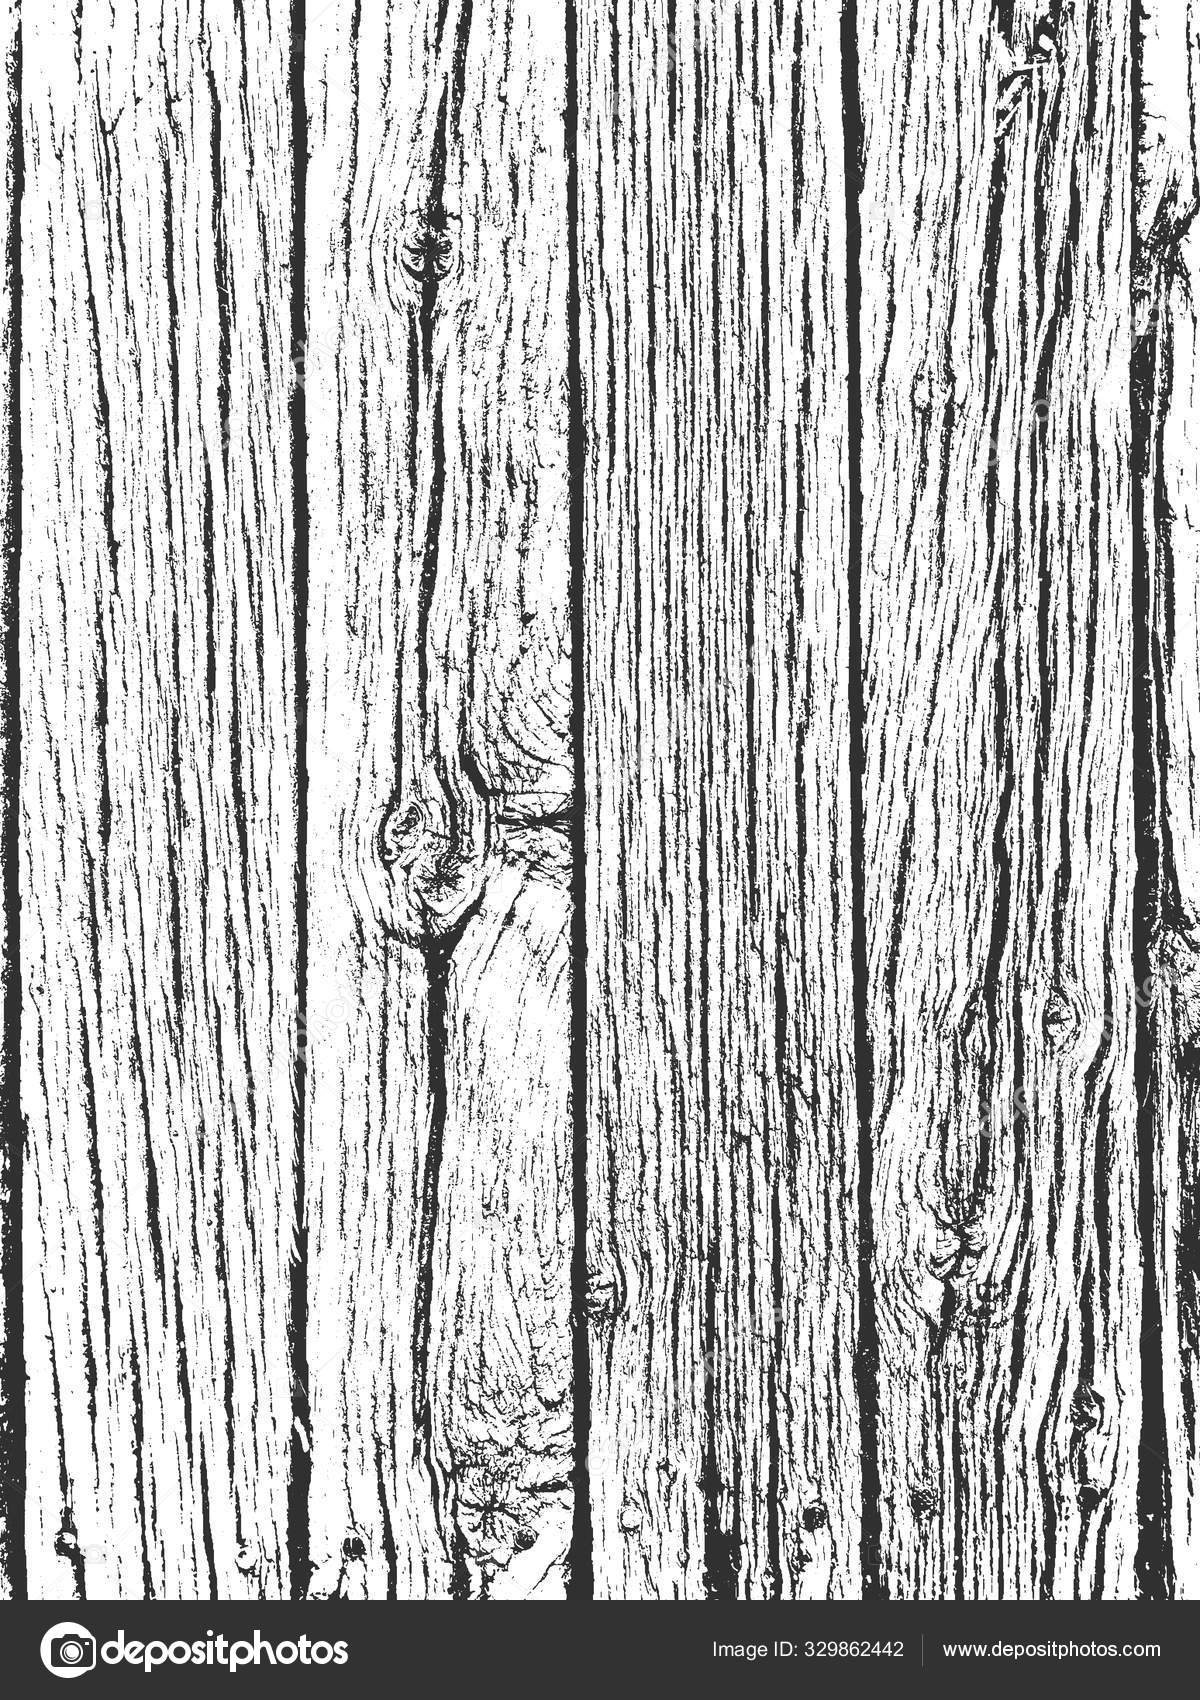 Distress old dry wooden texture. Black and white grunge background ...